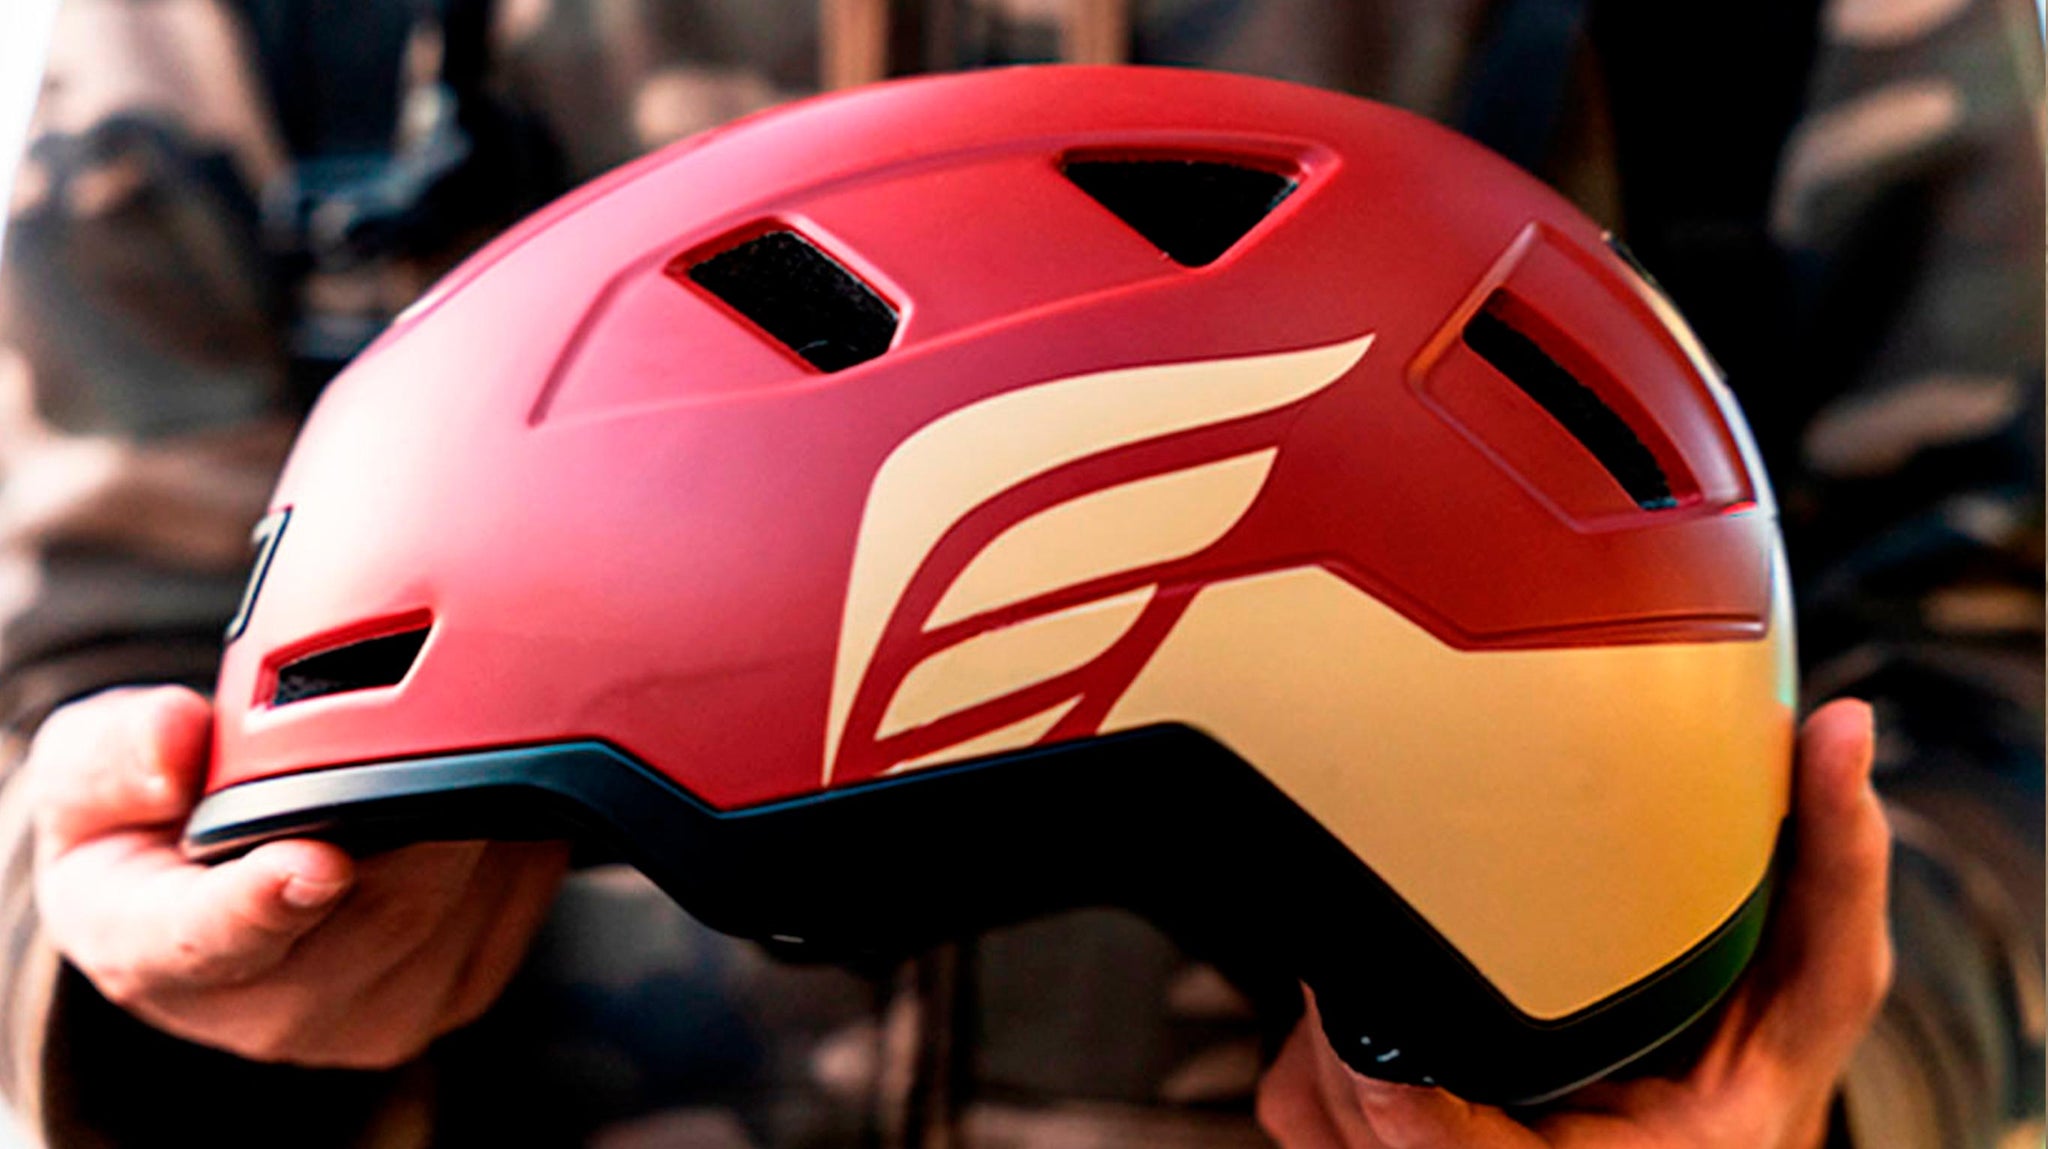 All seven e bike helmet styles will be available on our storefront